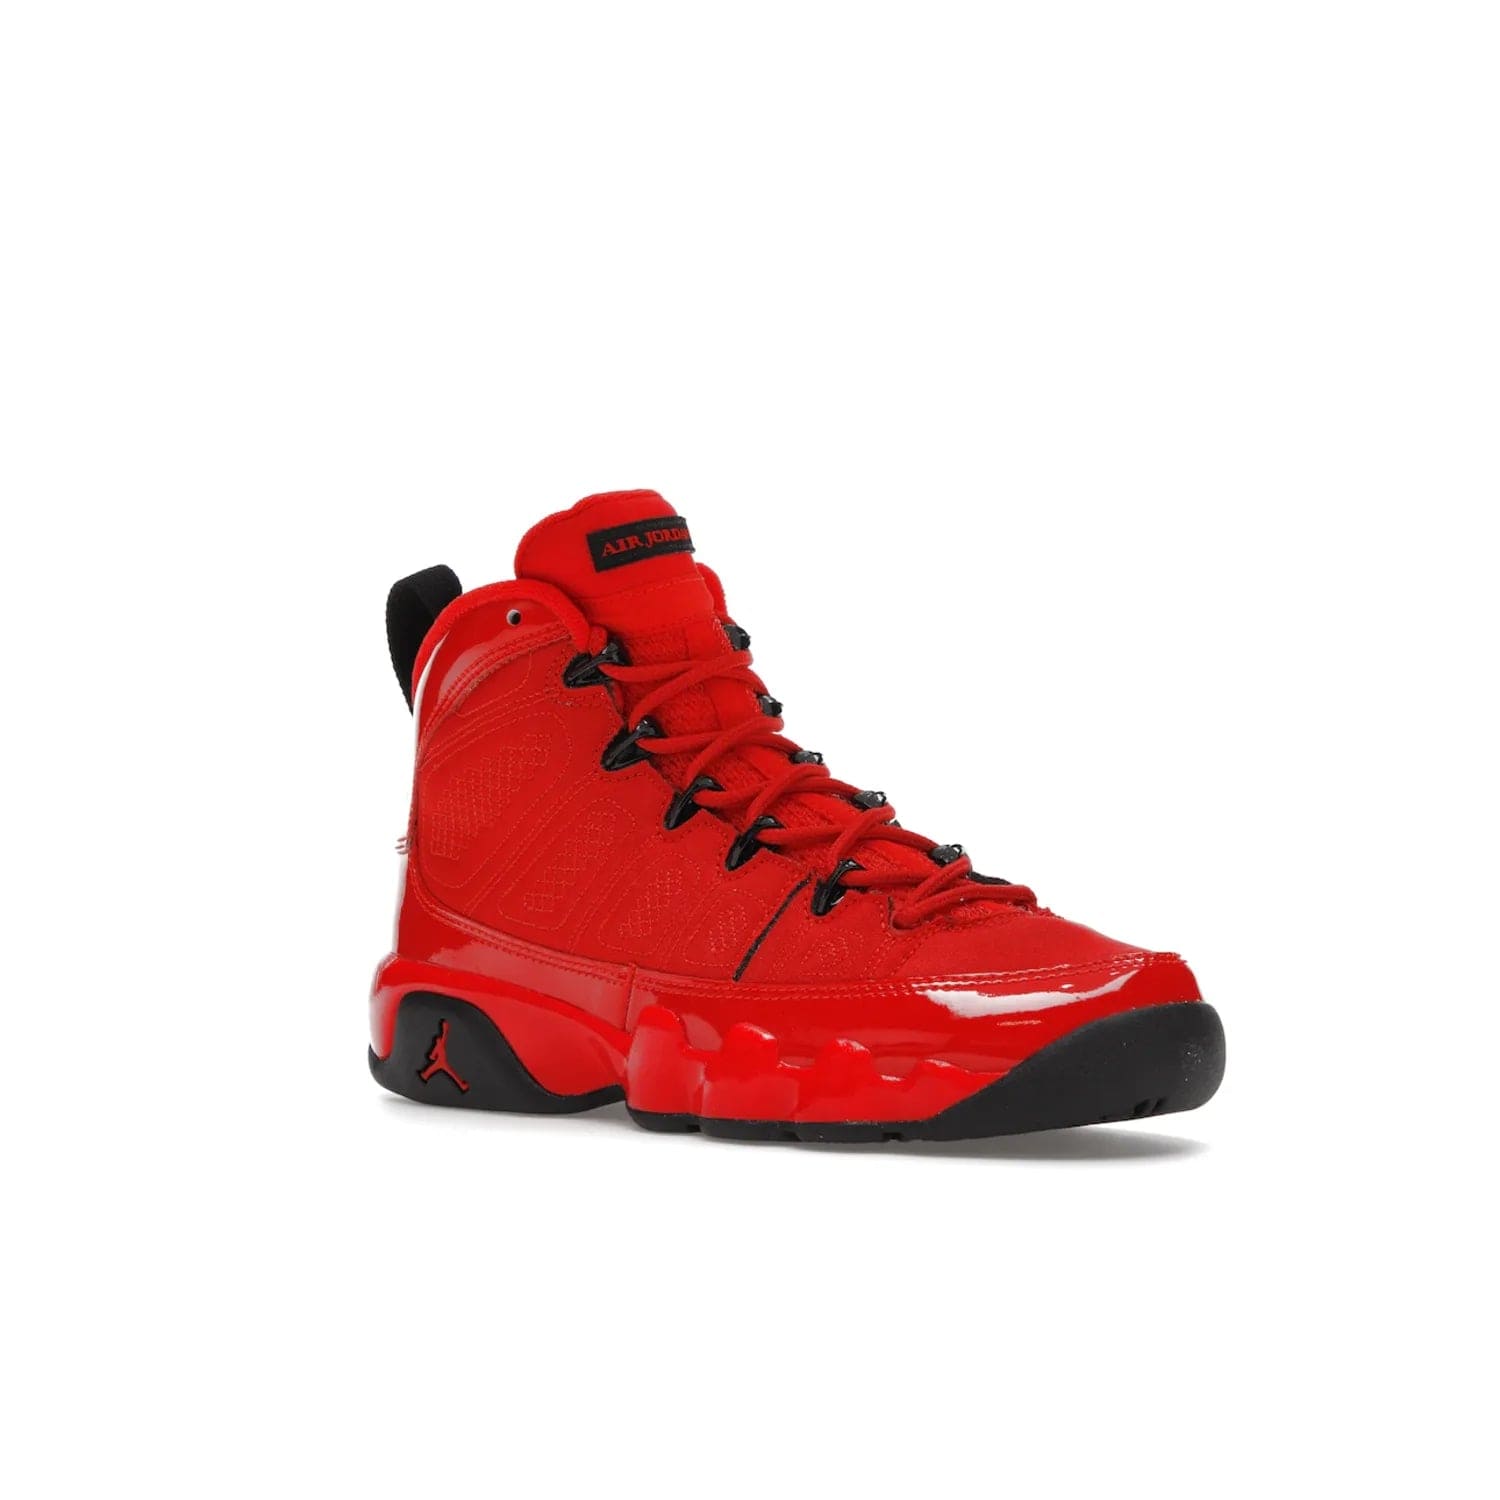 Jordan 9 Retro Chile Red (GS) - Image 5 - Only at www.BallersClubKickz.com - Introducing the Air Jordan 9 Retro Chile Red (GS), a vintage 1993 silhouette with fiery colorway. Features quilted side paneling, glossy patent leather, pull tabs, black contrast accents, and foam midsole. Launching May 2022 for $140.